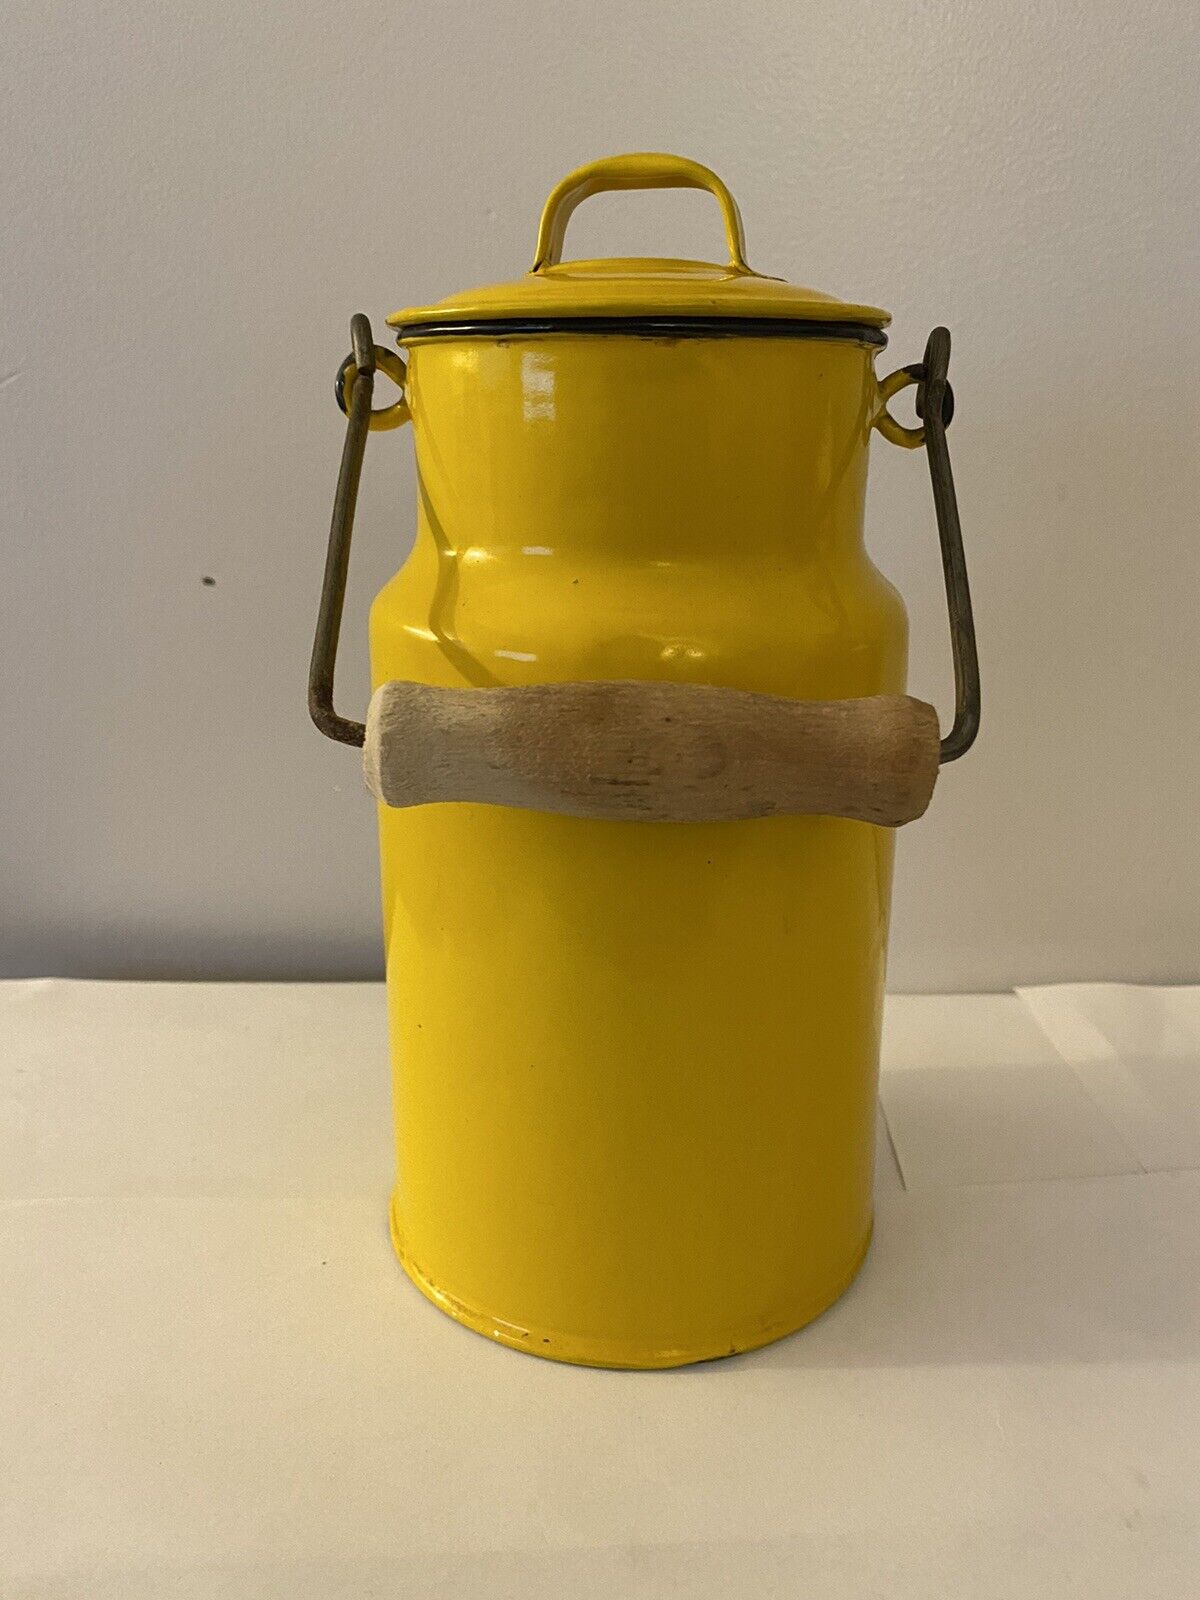 Vtg Enamel Milk Can Jar Container Yellow Made in Poland 2 Piece w/ Wooden Handle